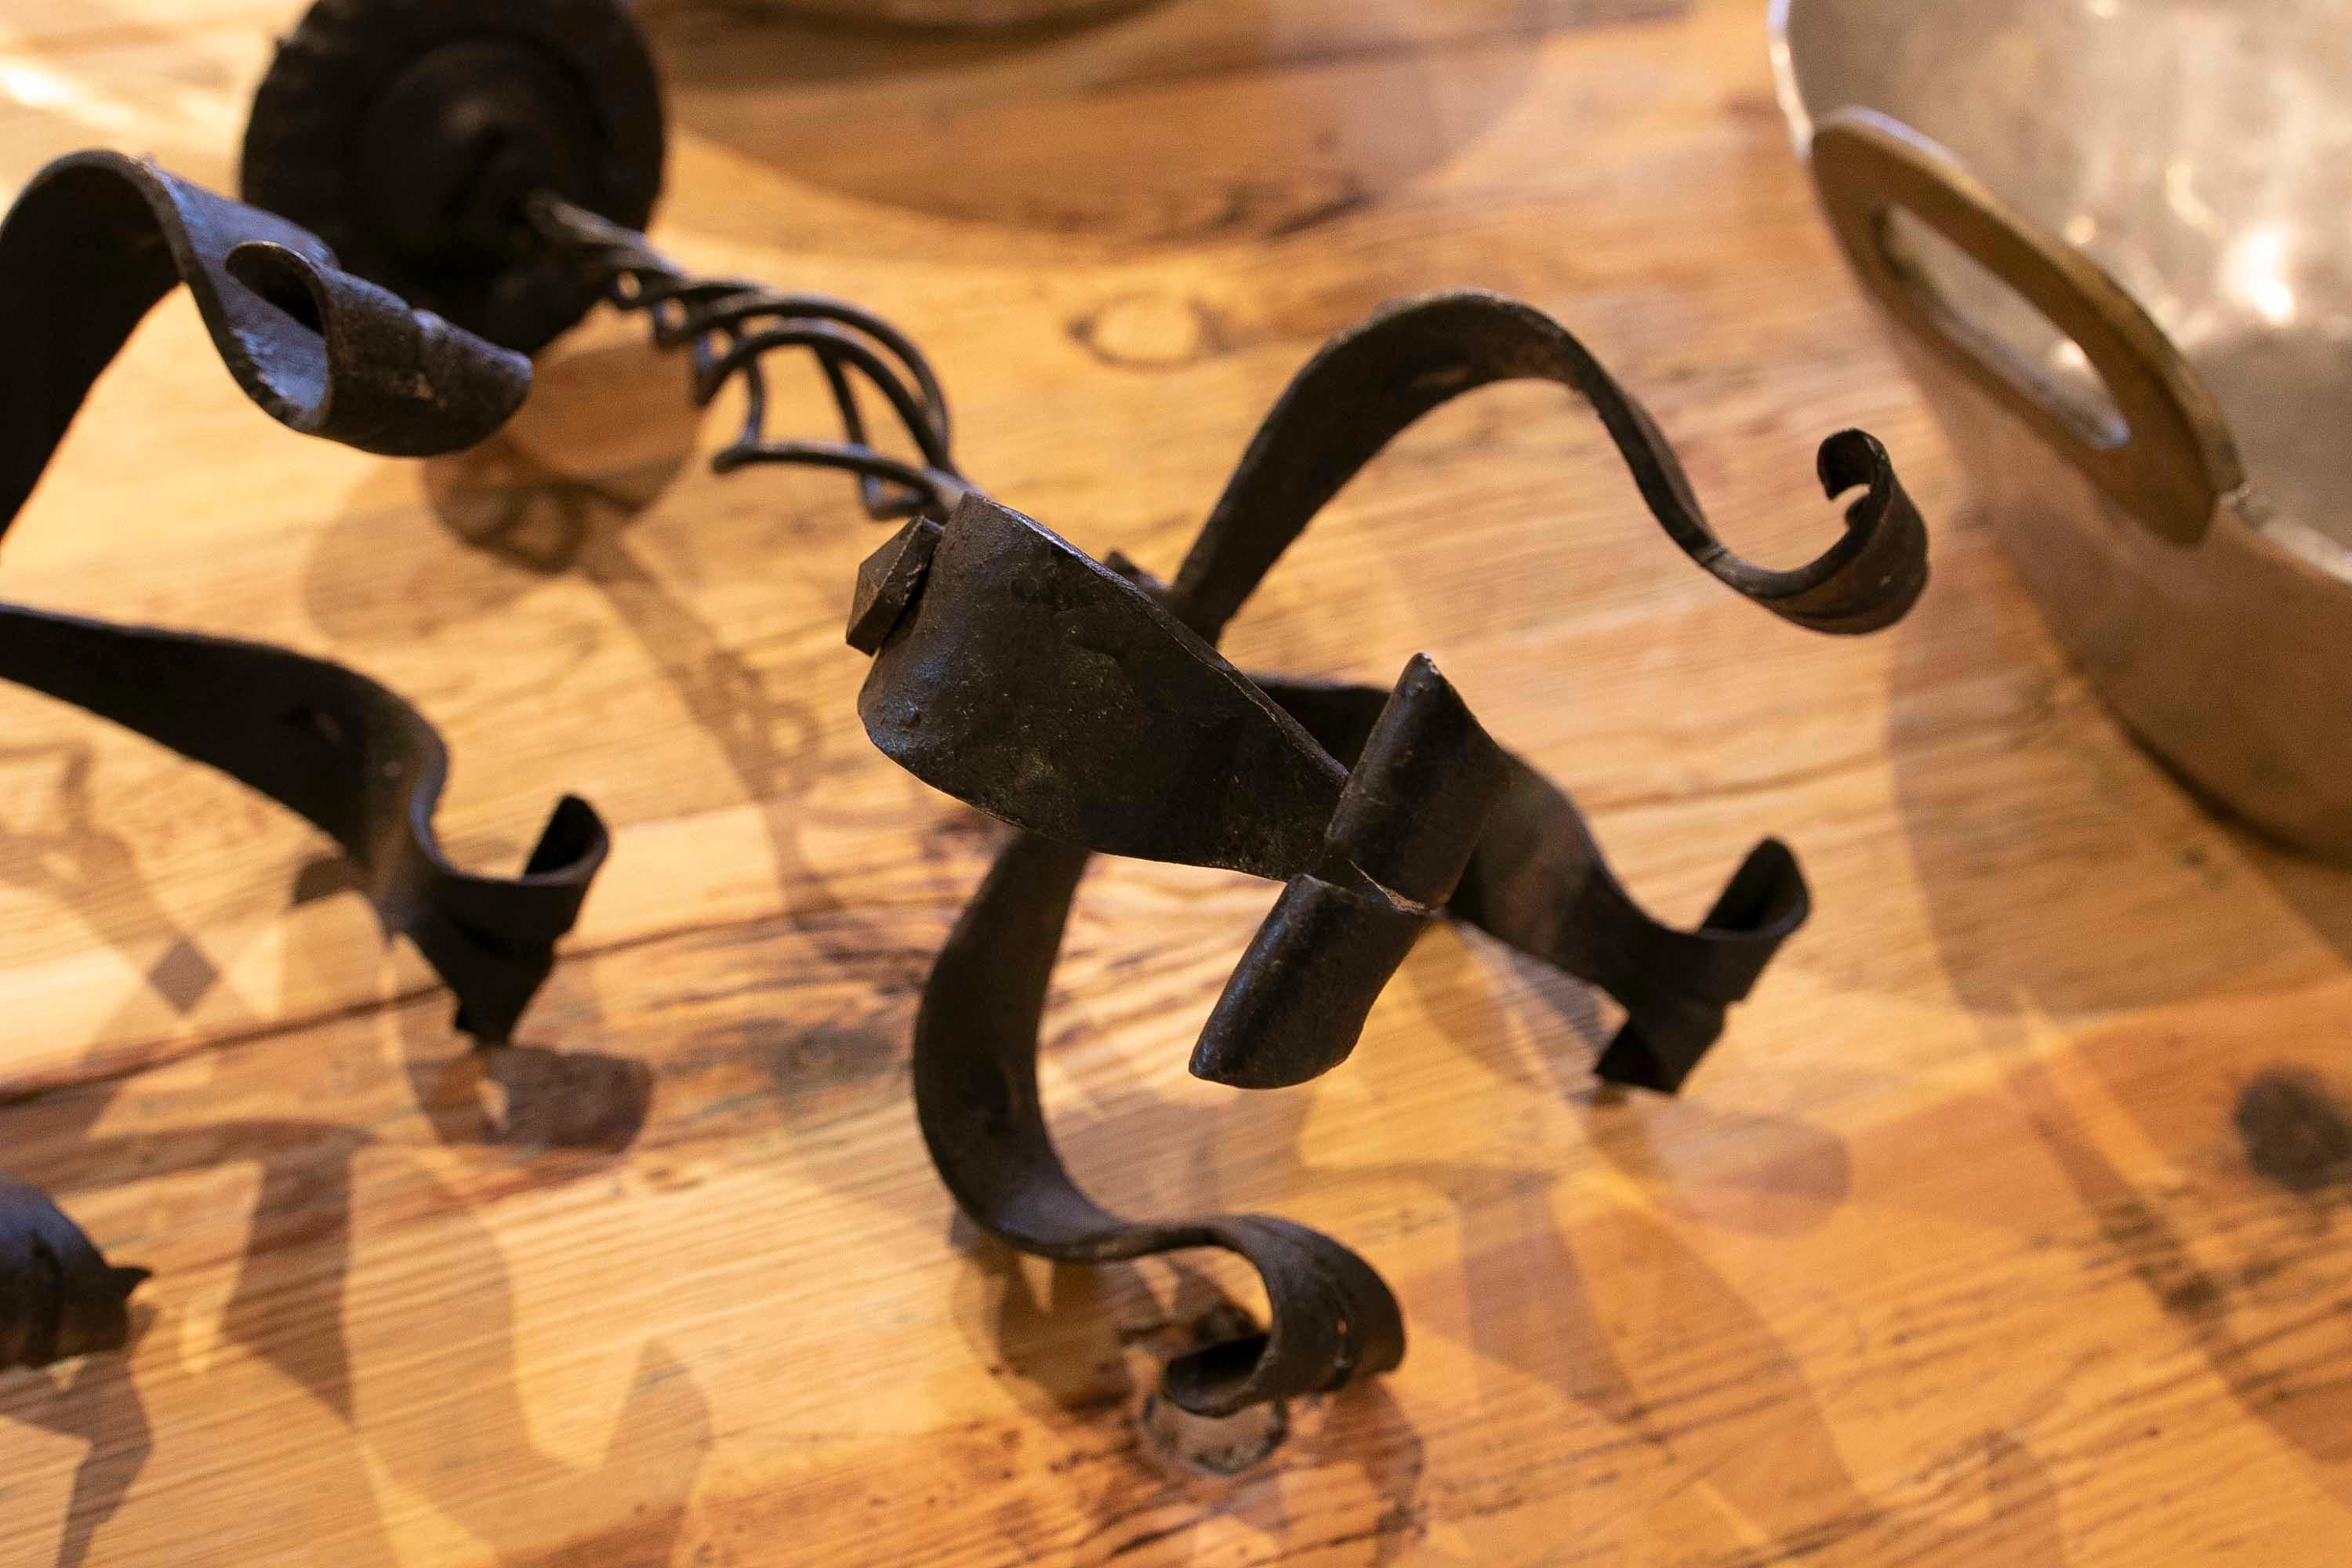 Spanish Pair of Iron Candlesticks with Four Legs For Sale 9